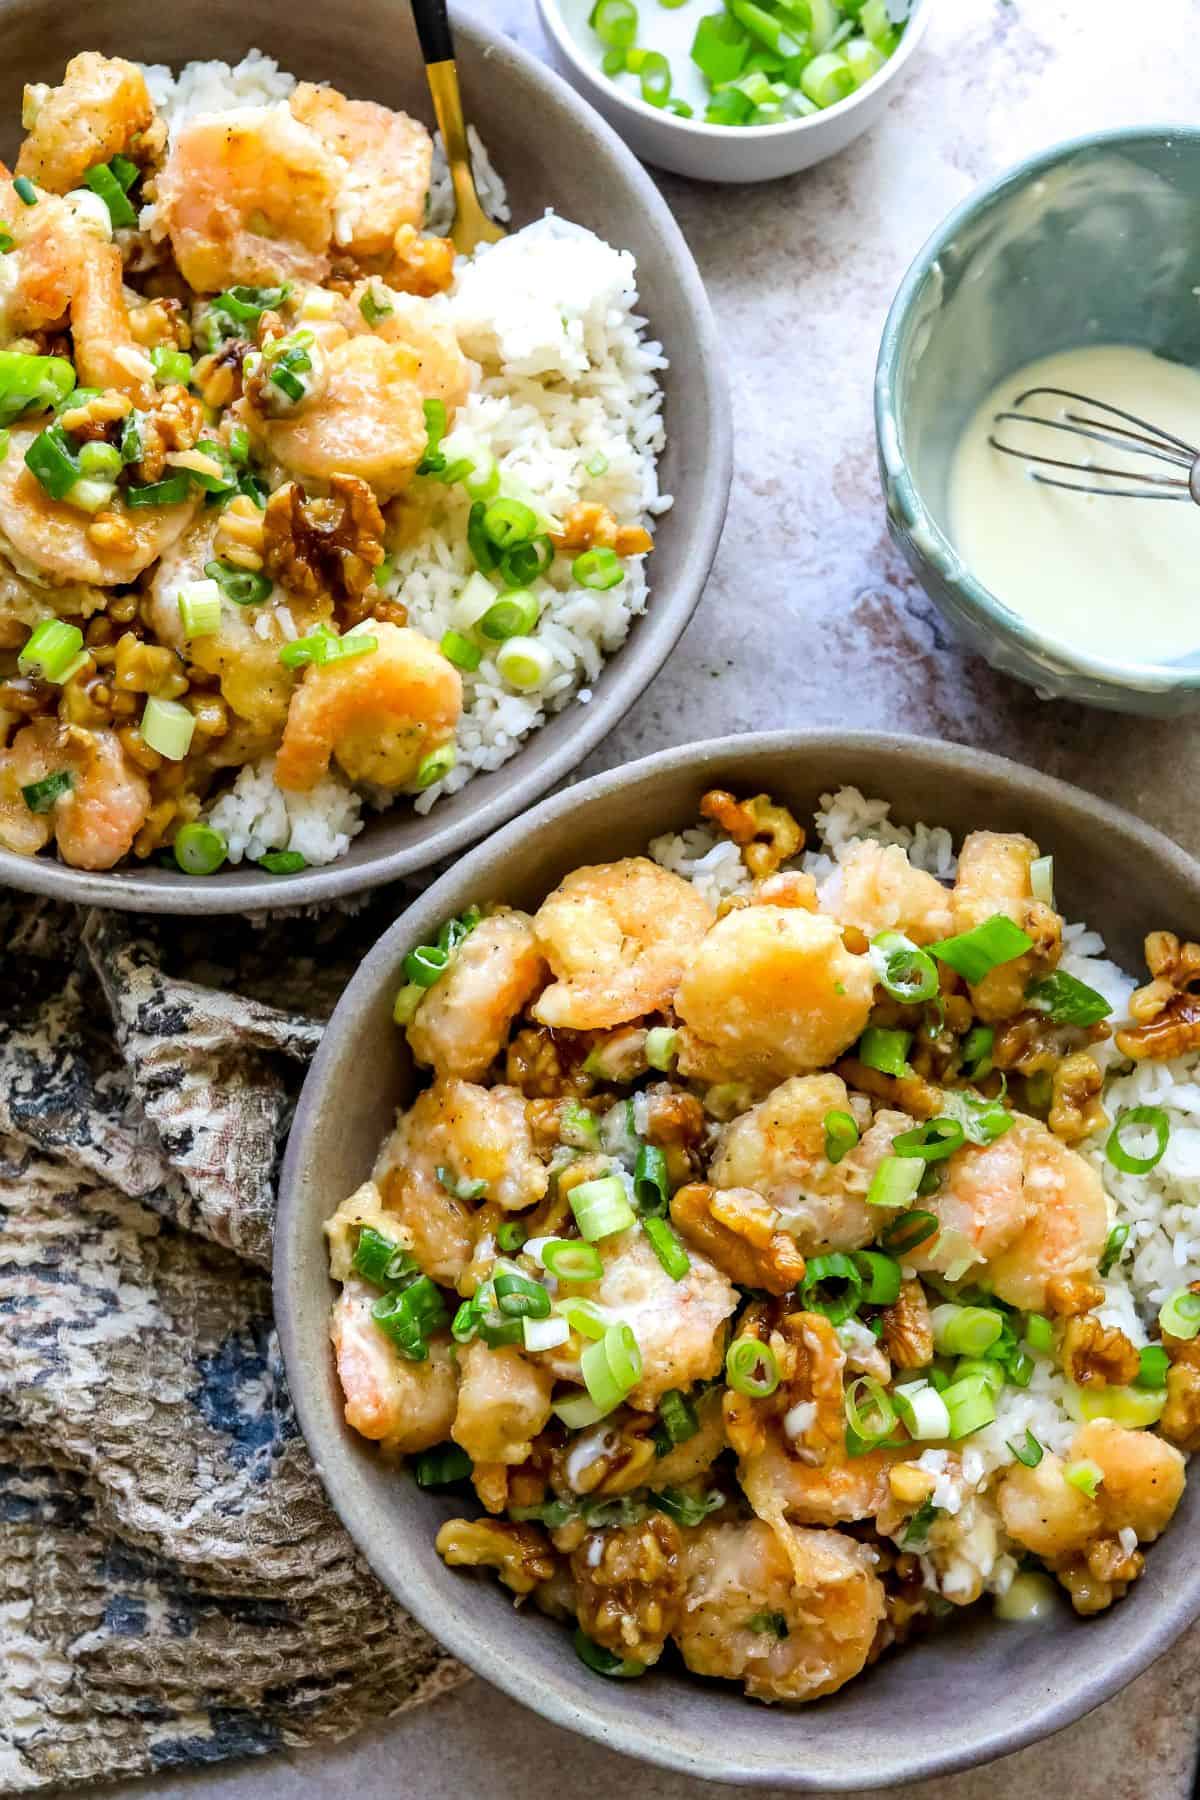 An image of two bowls of honey walnut shrimp with rice, garnished with green onions and candied walnuts.